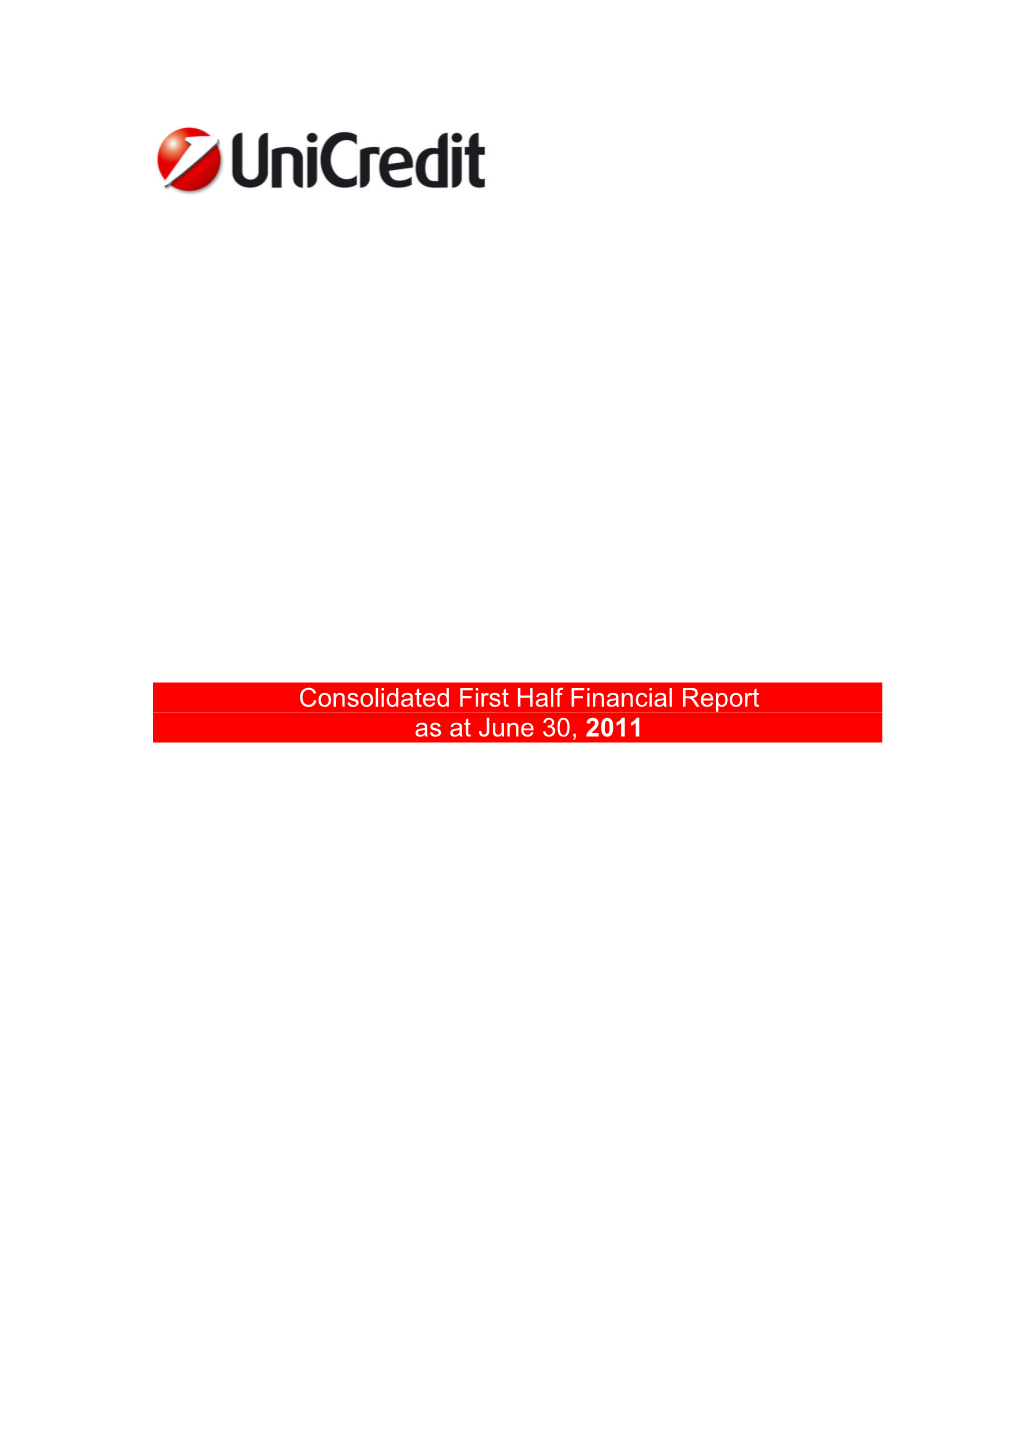 Consolidated First Half Financial Report As at June 30, 2011 Unicredit S.P.A